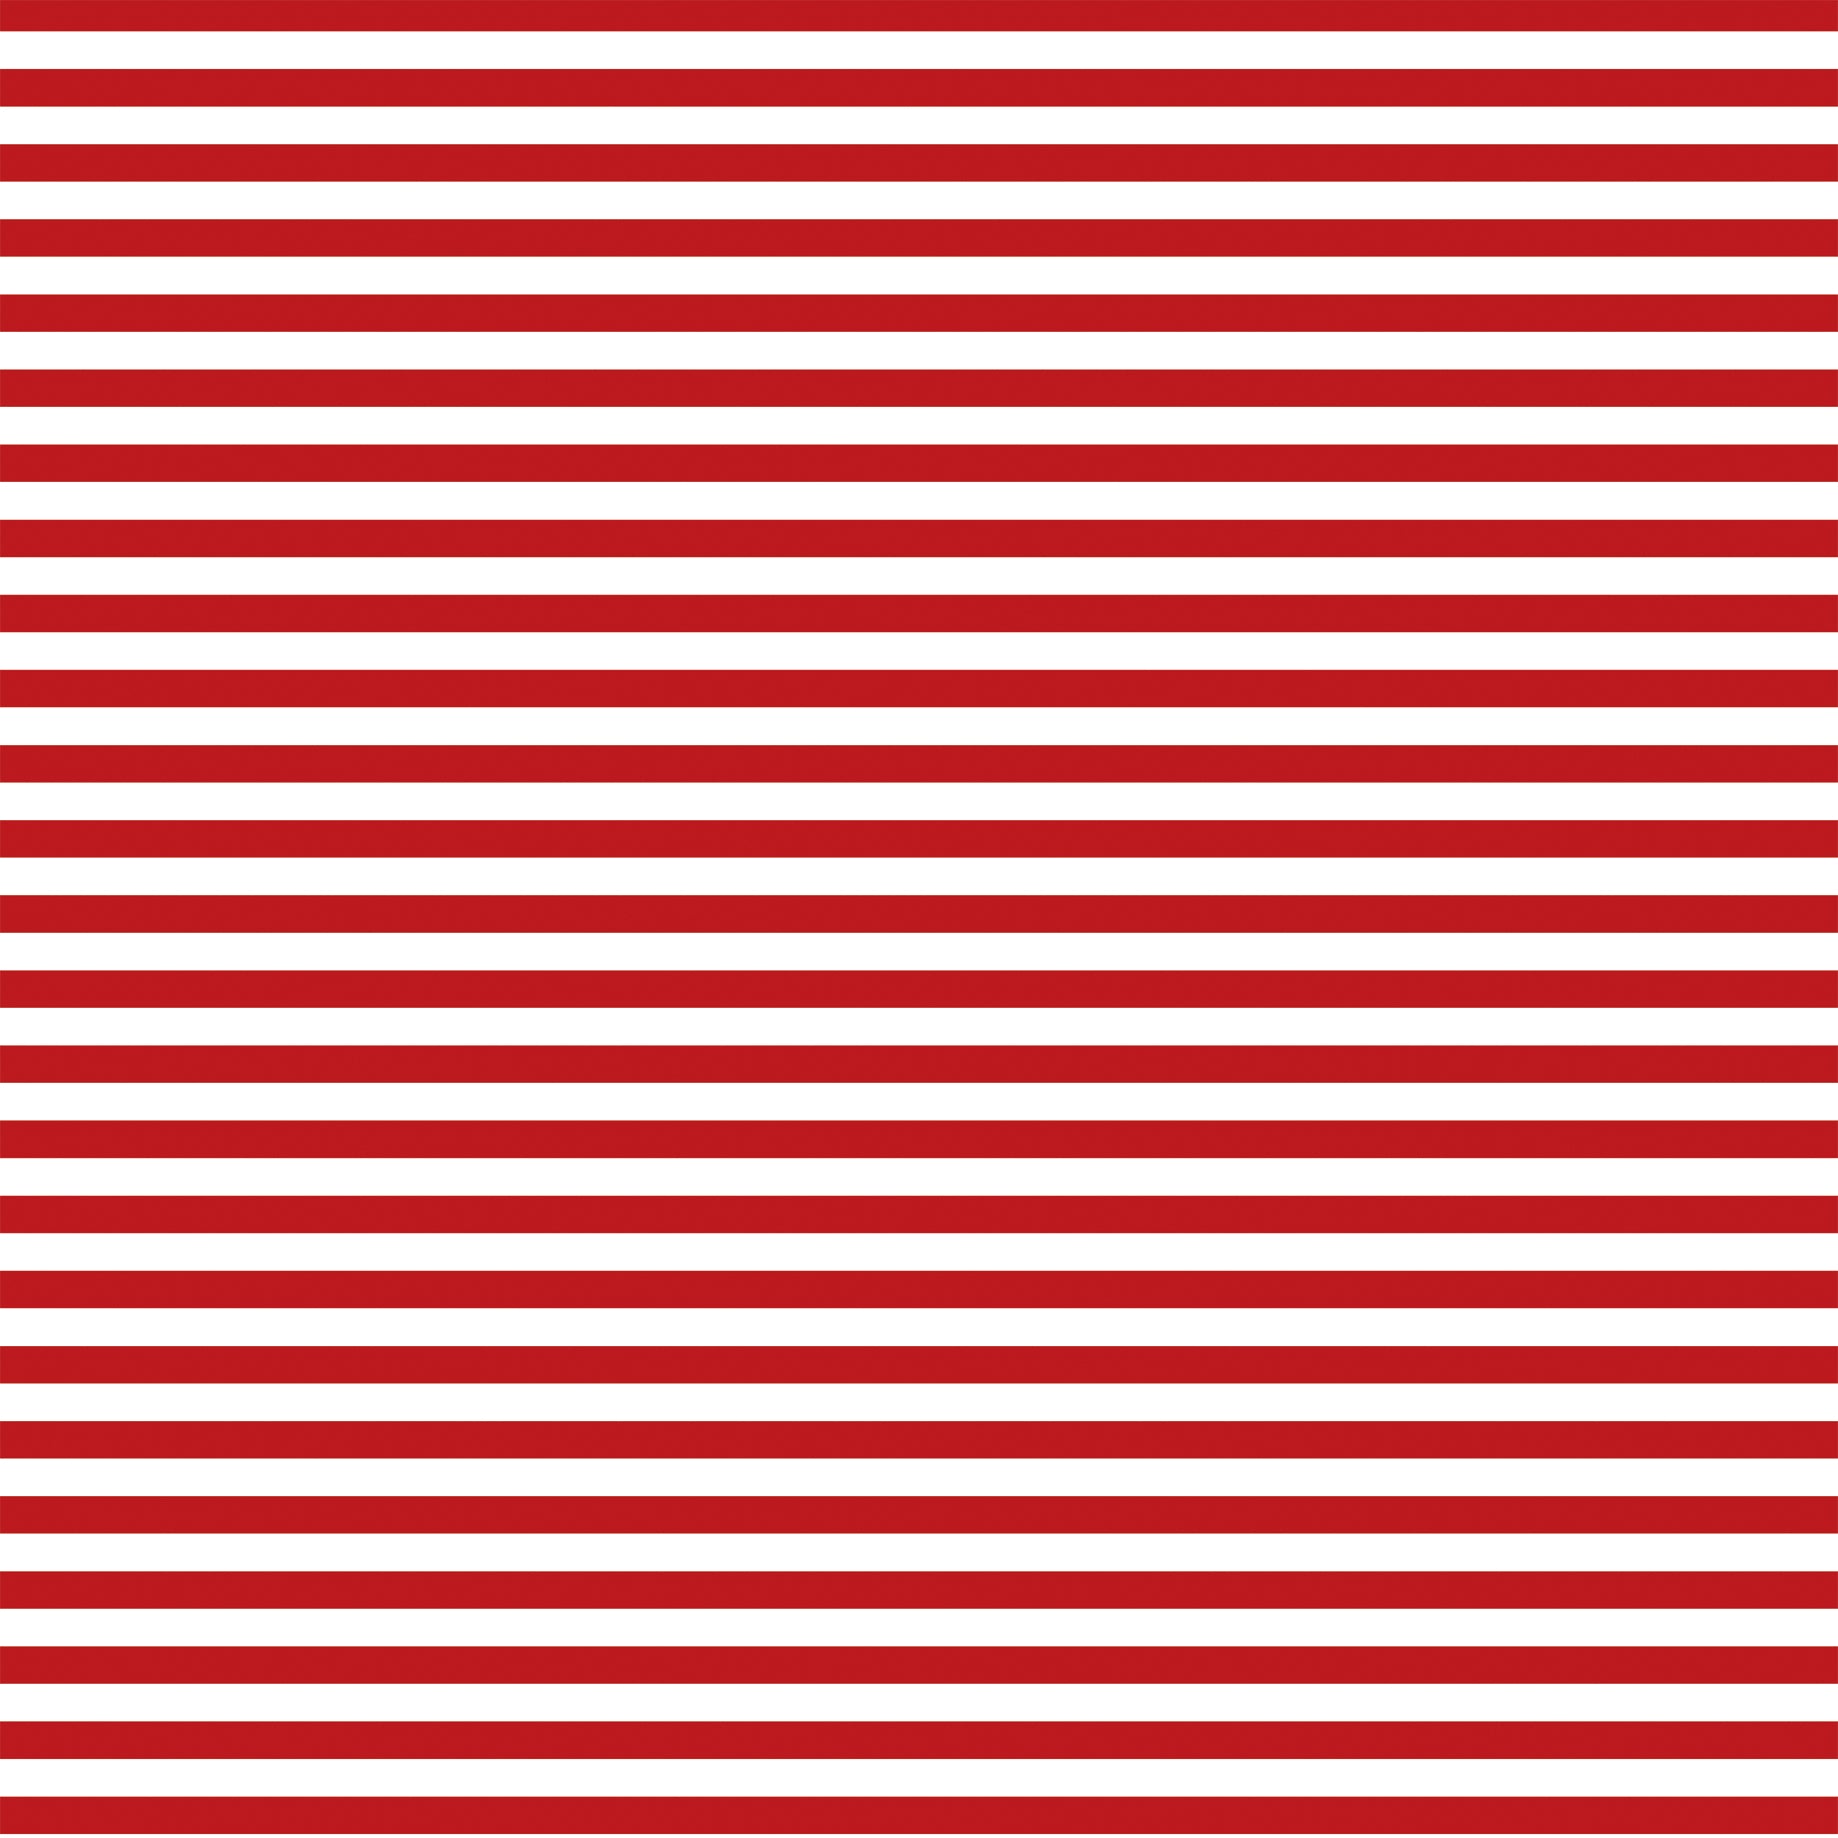 Stars and Stripes Forever Collection Shooting Stars 12 x 12 Double-Sided Scrapbook Paper by Echo Park Paper